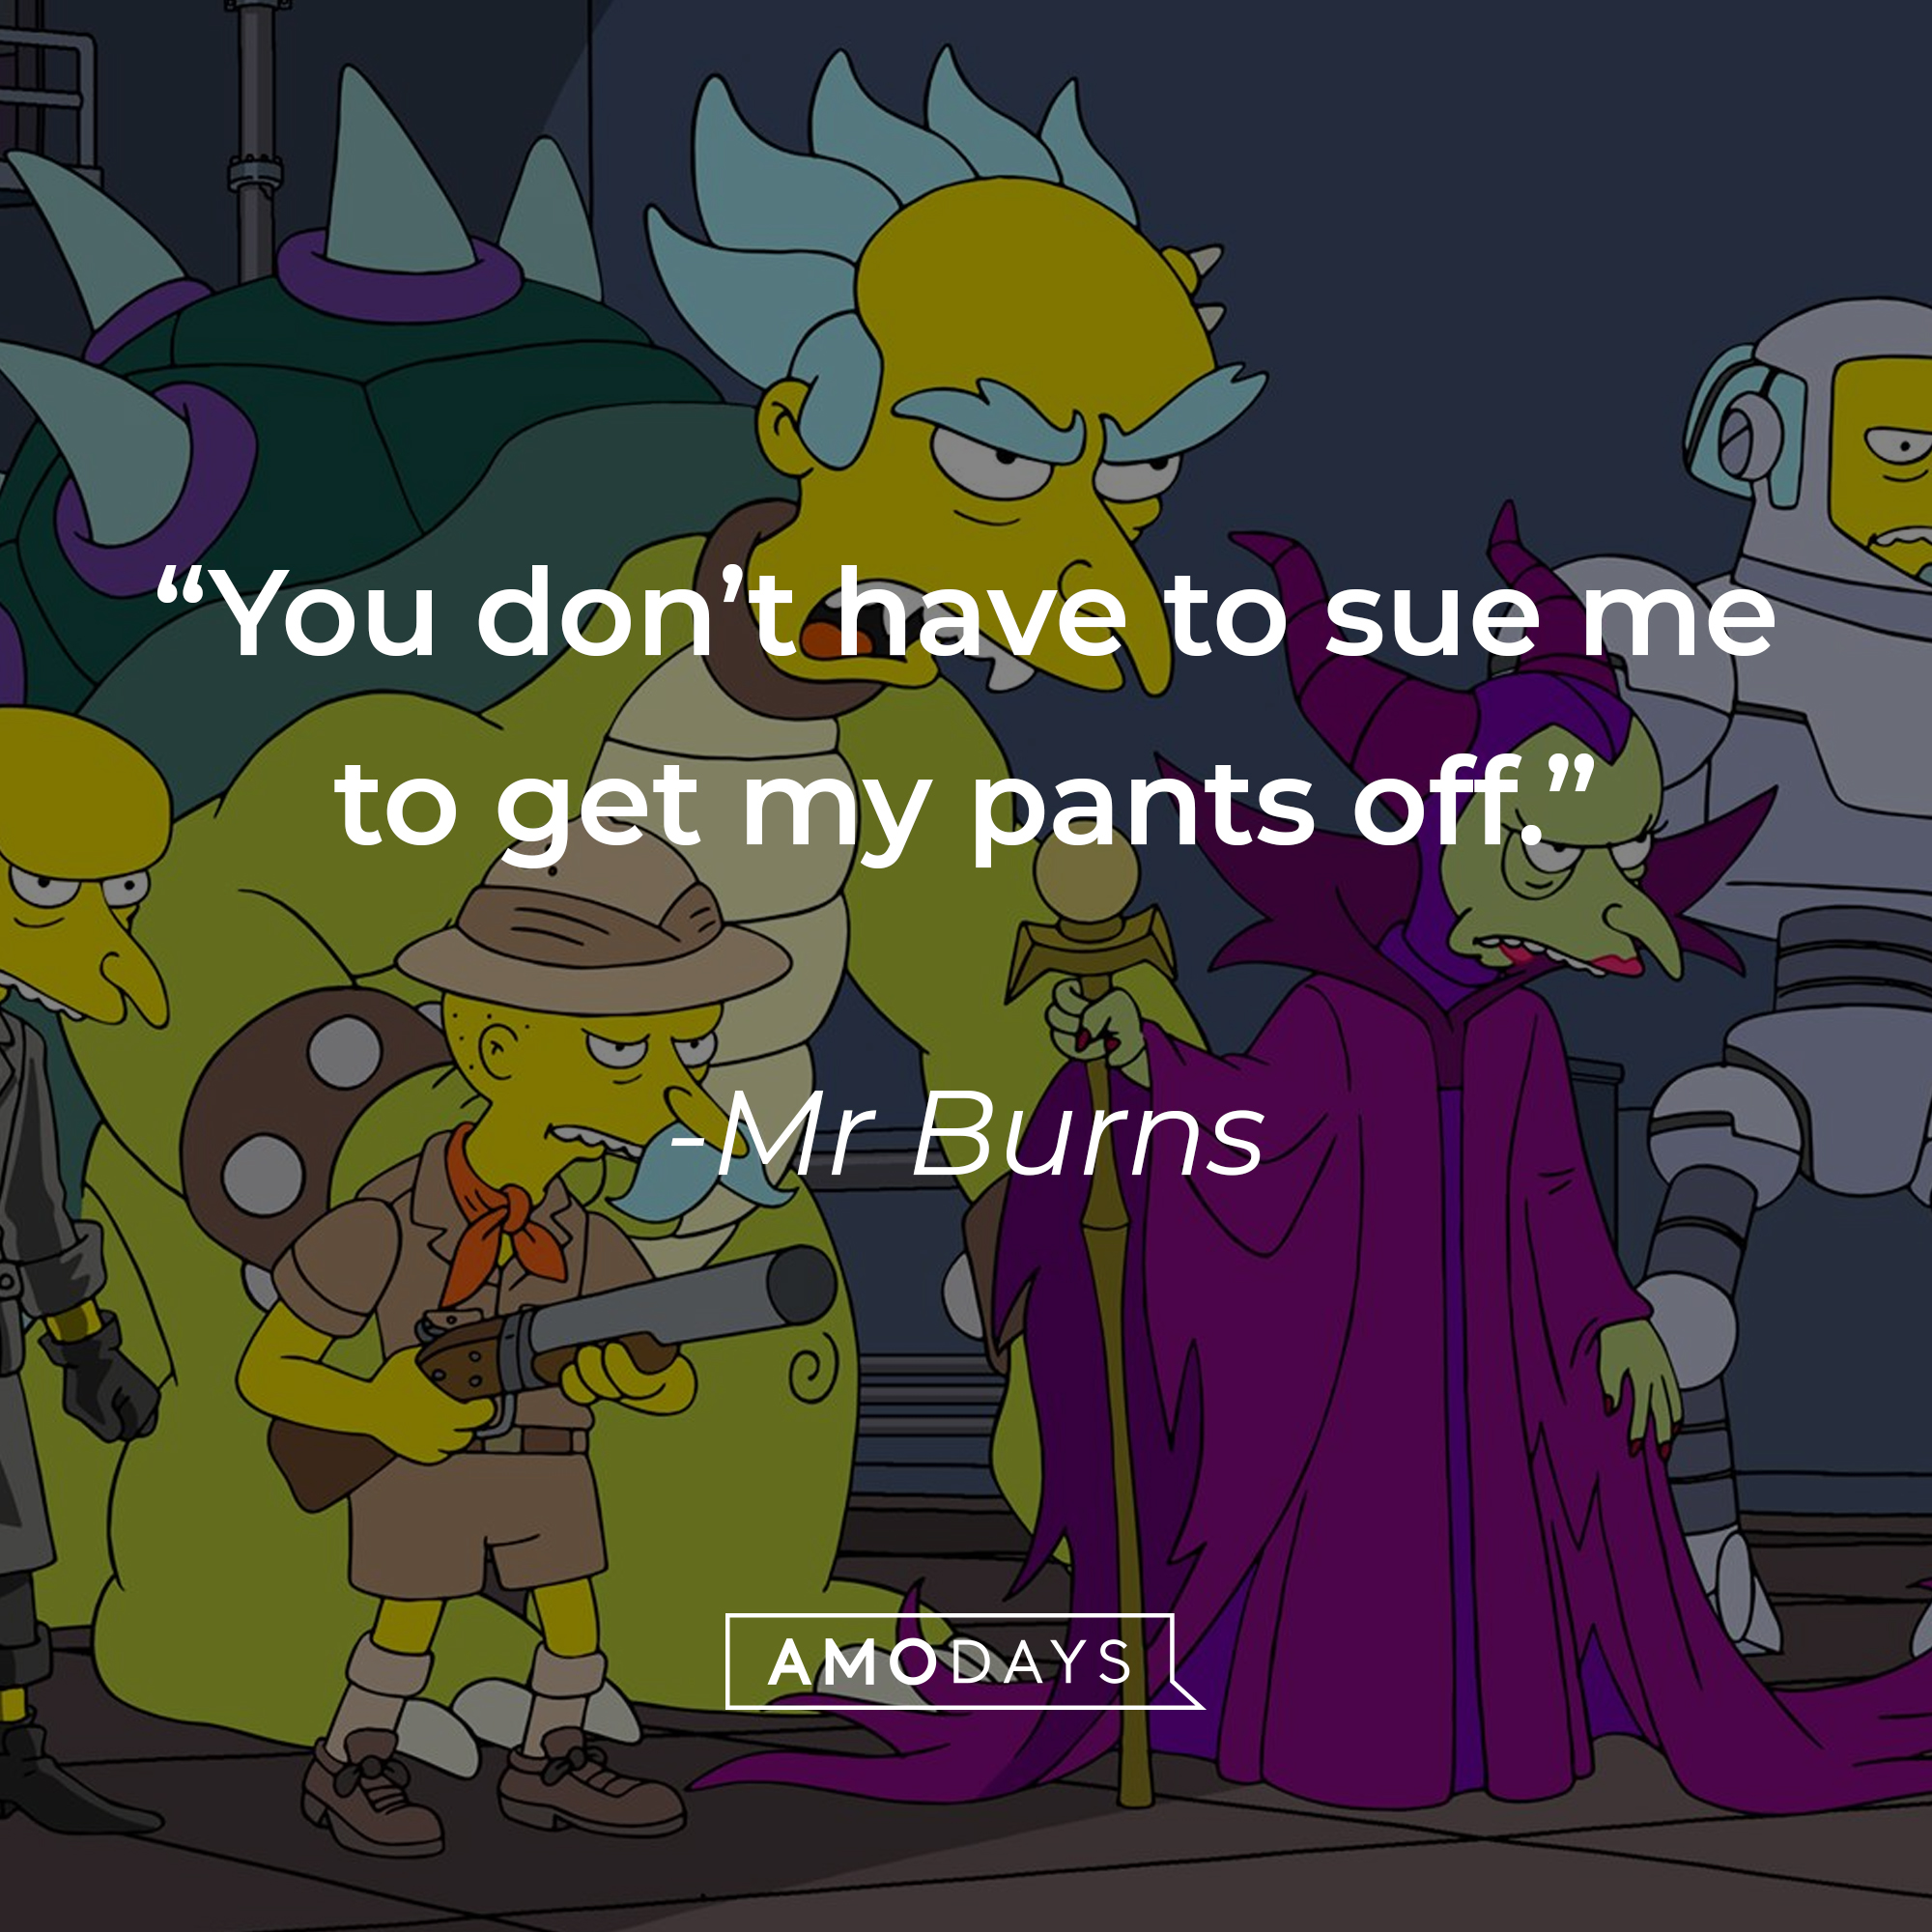 Mr. Burns' quote: "You don't have to sue me to get my pants off." | Source: facebook.com/TheSimpsons